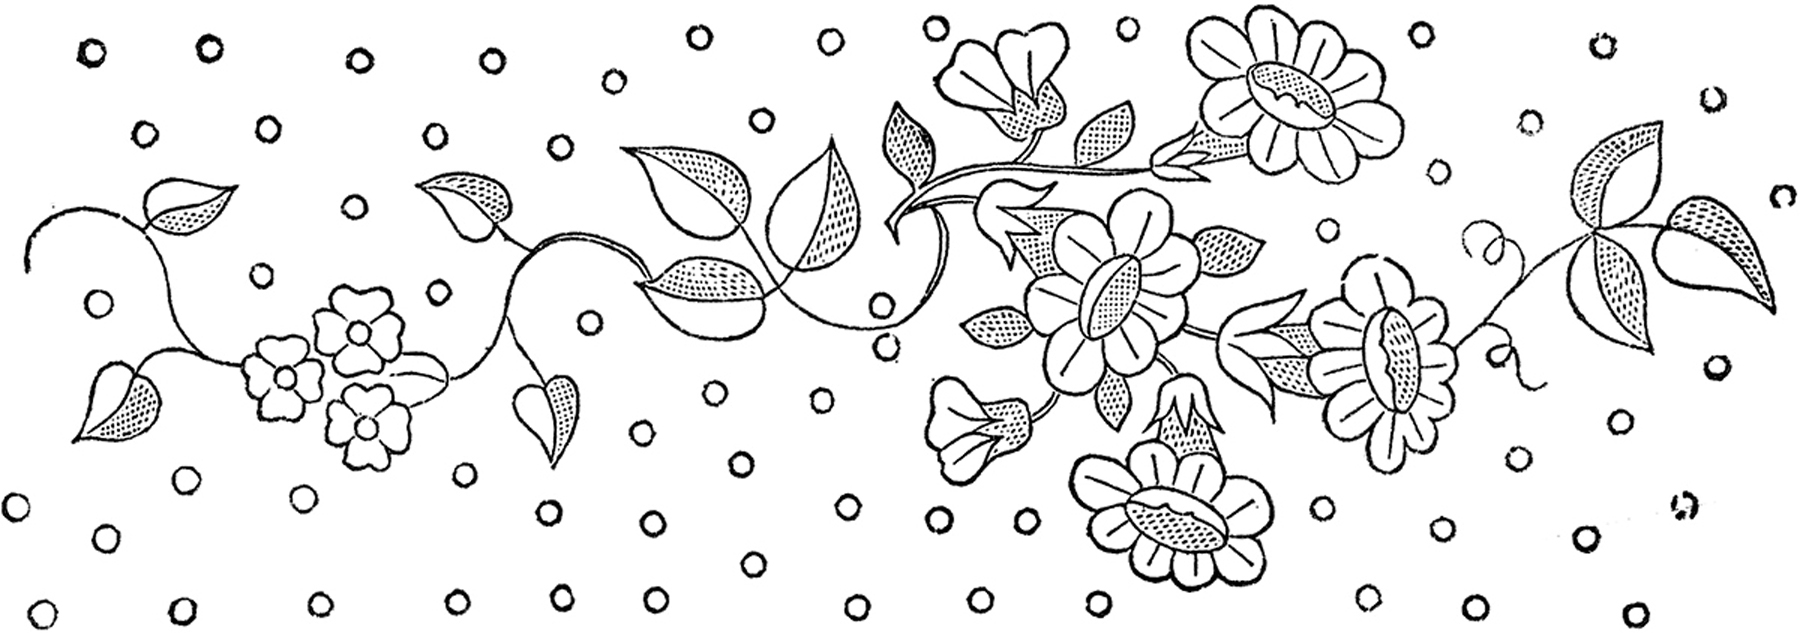 Free Flower Embroidery Patterns Floral Embroidery Patterns Pretty The Graphics Fairy